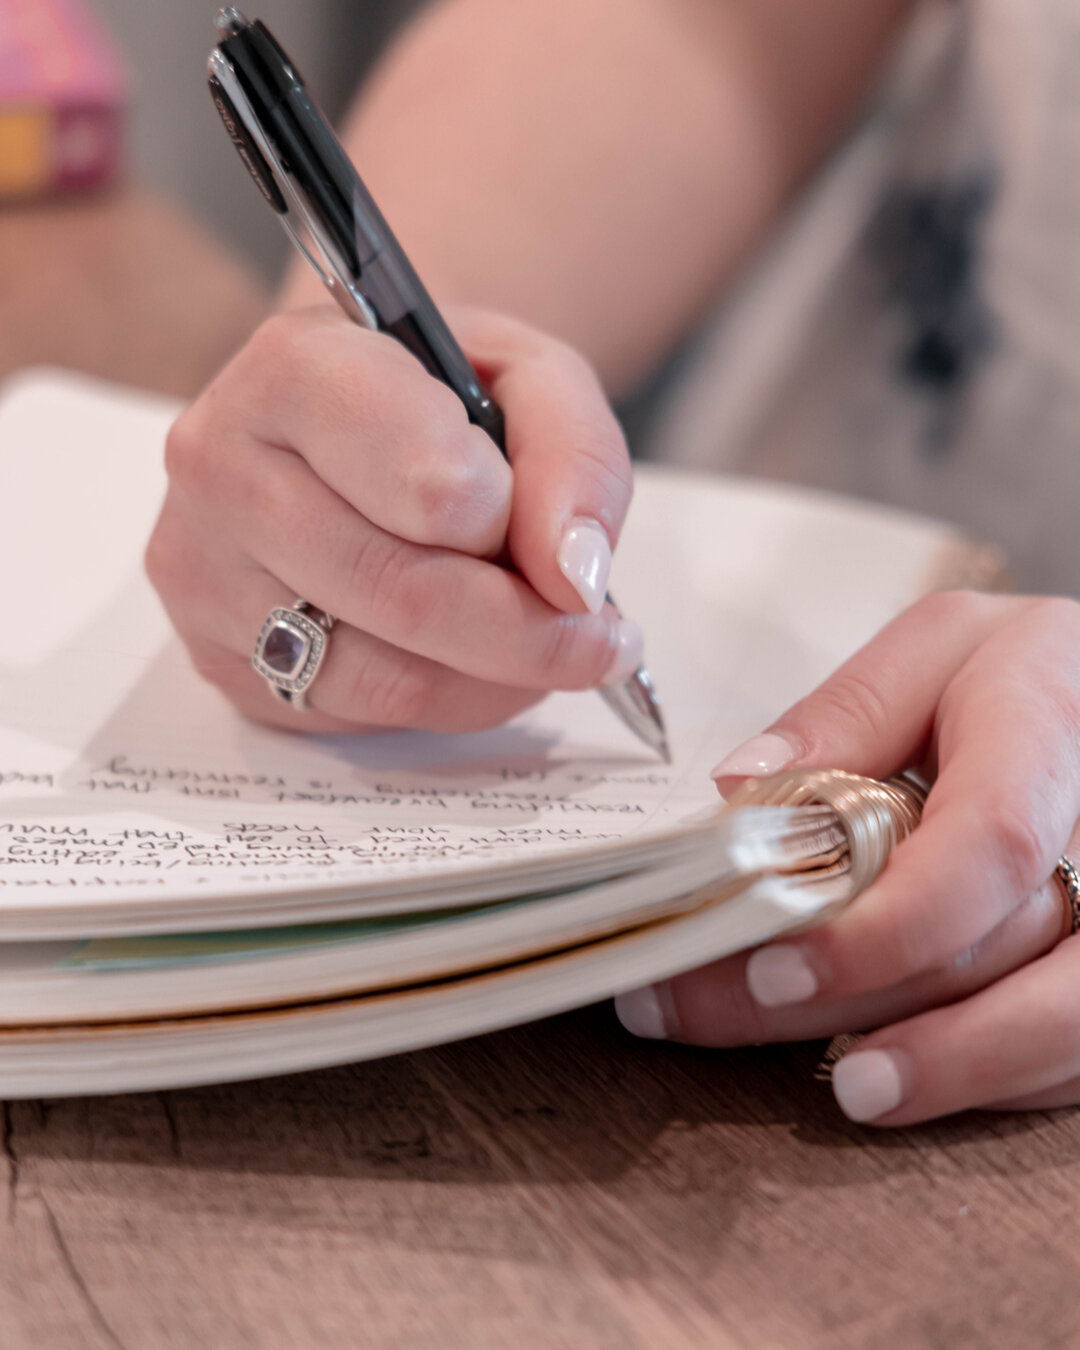 ON THE BLOG - Daily Journaling Prompts for Anxiety by Nicole Thaxton, PhD, LPC, NCC, CPCS​​​​​​​​​
&quot;Journaling is one of my favorite anxiety tips and coping skills to recommend as a counselor who works with anxiety. But why?&quot;
​​​​​​​​​​​​​
